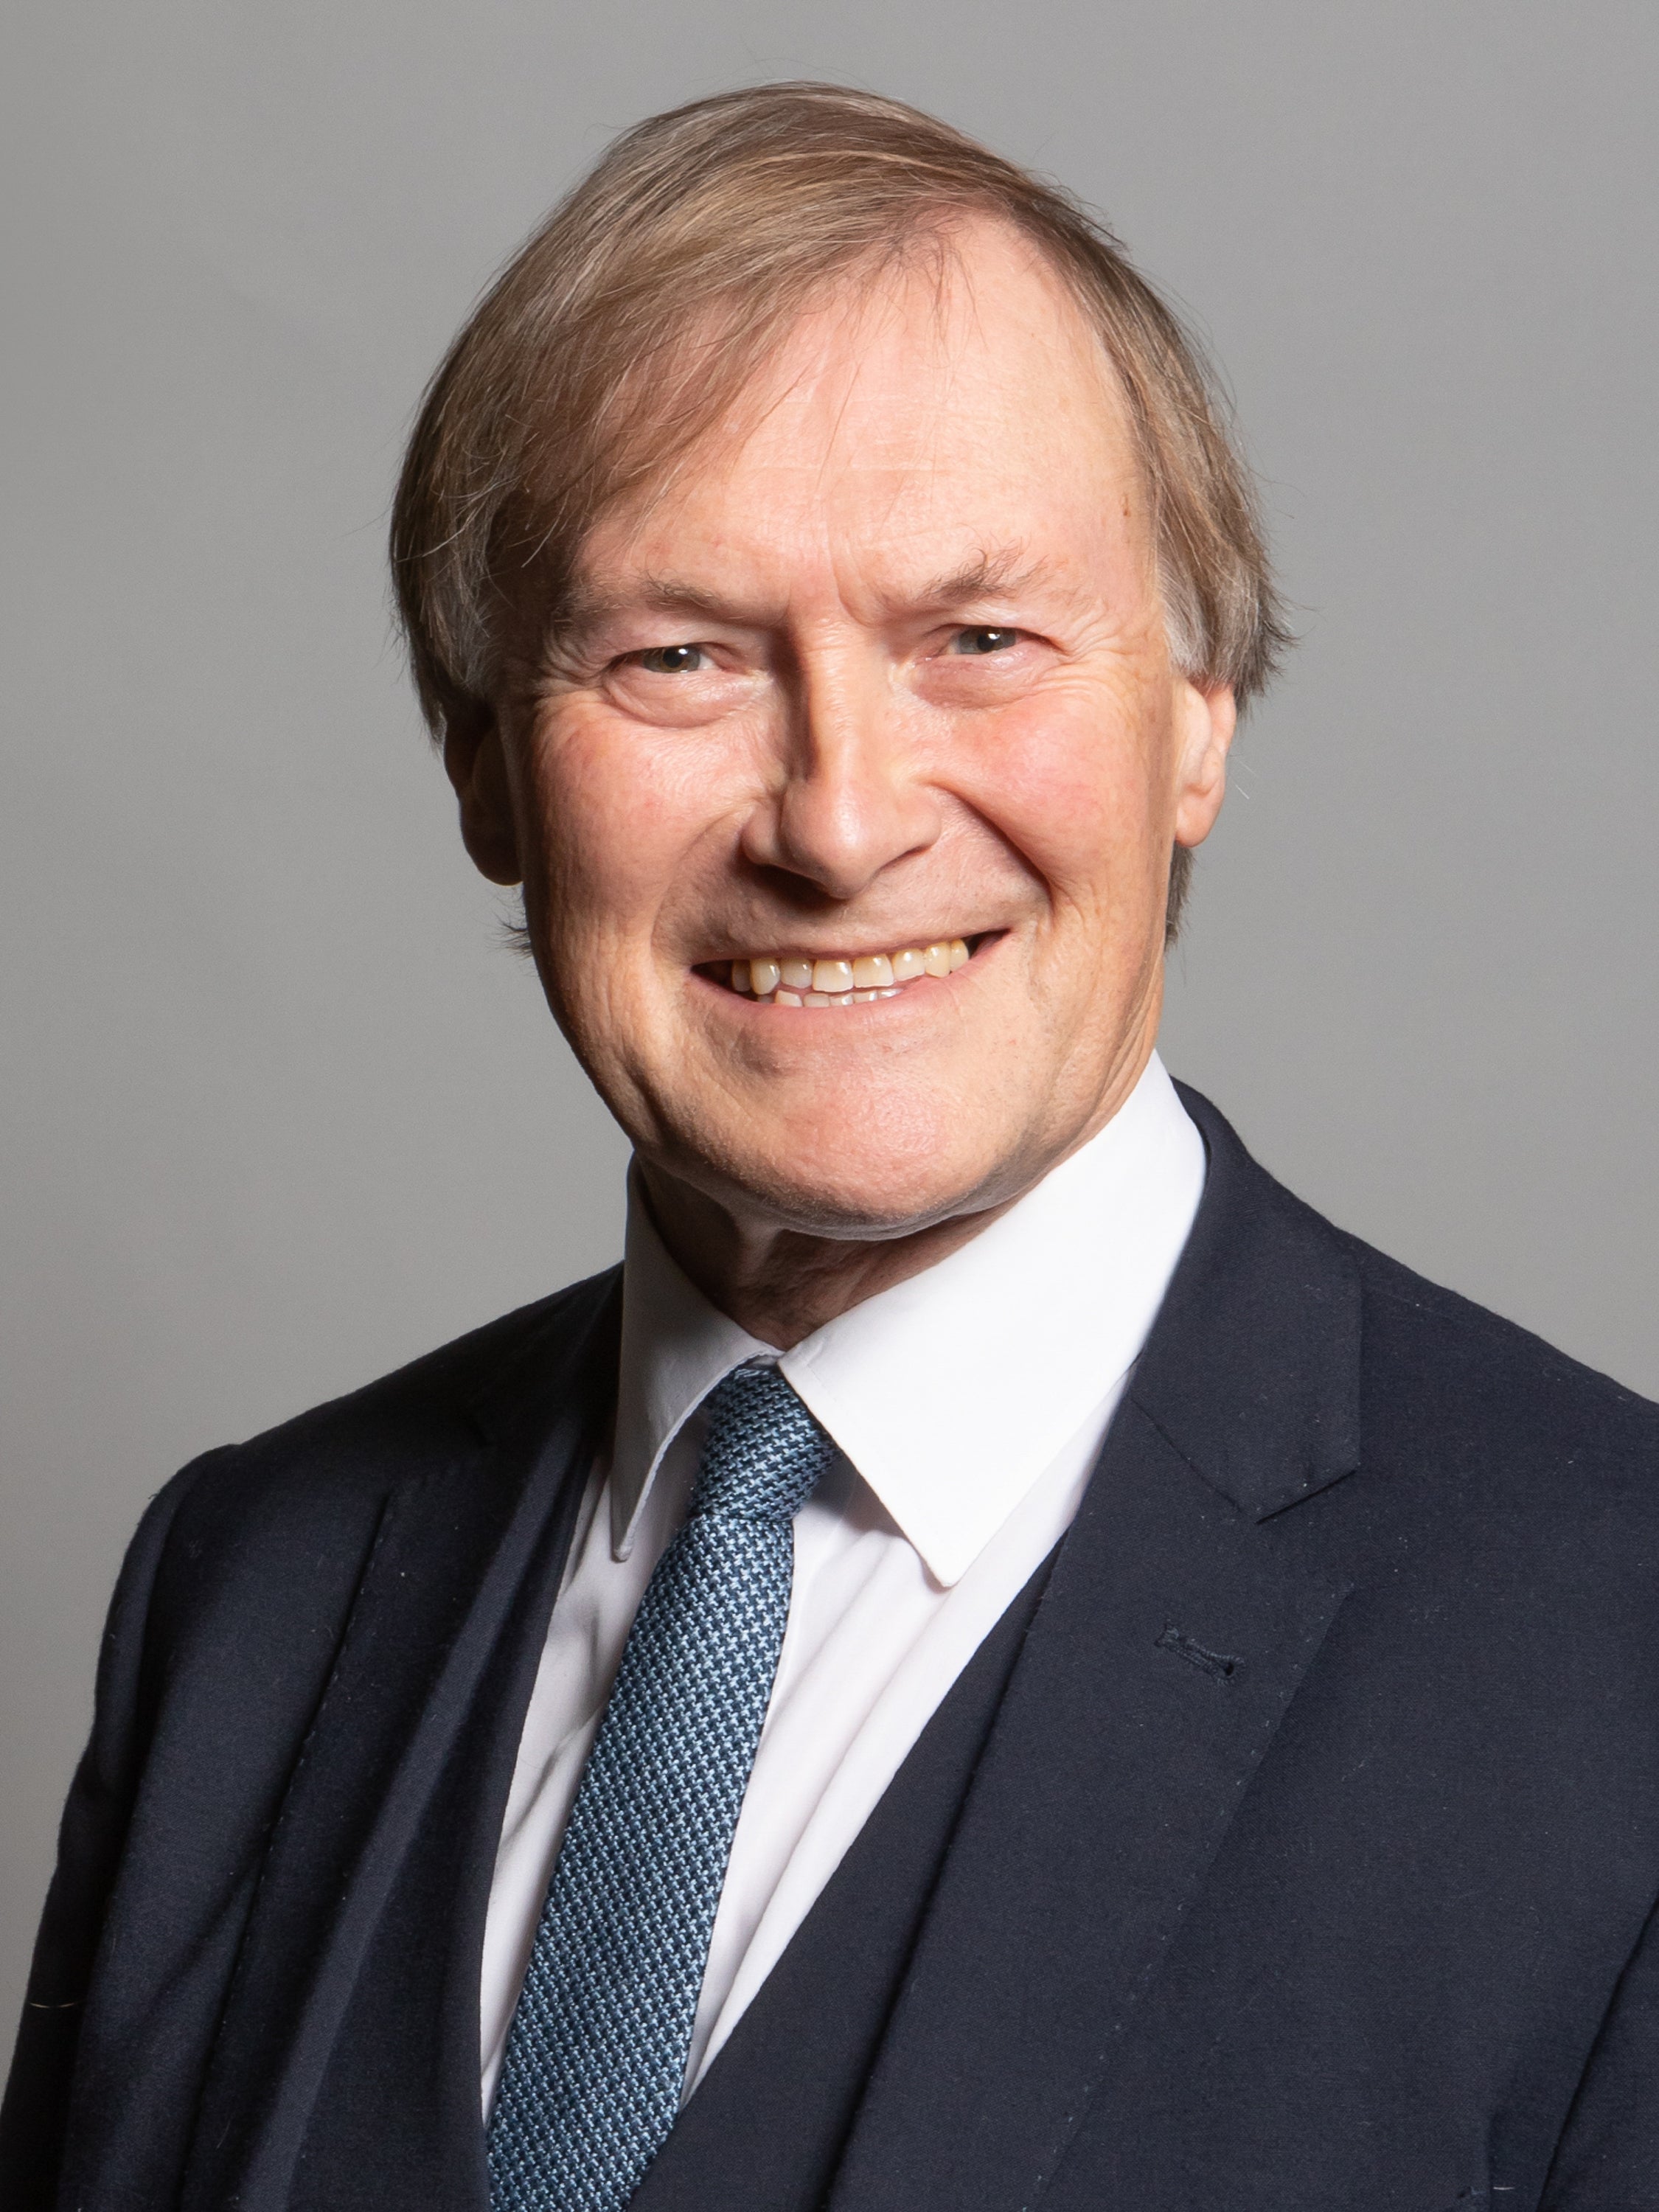 Sir David Amess, Conservative MP for Leigh on Sea from 1997 to last October